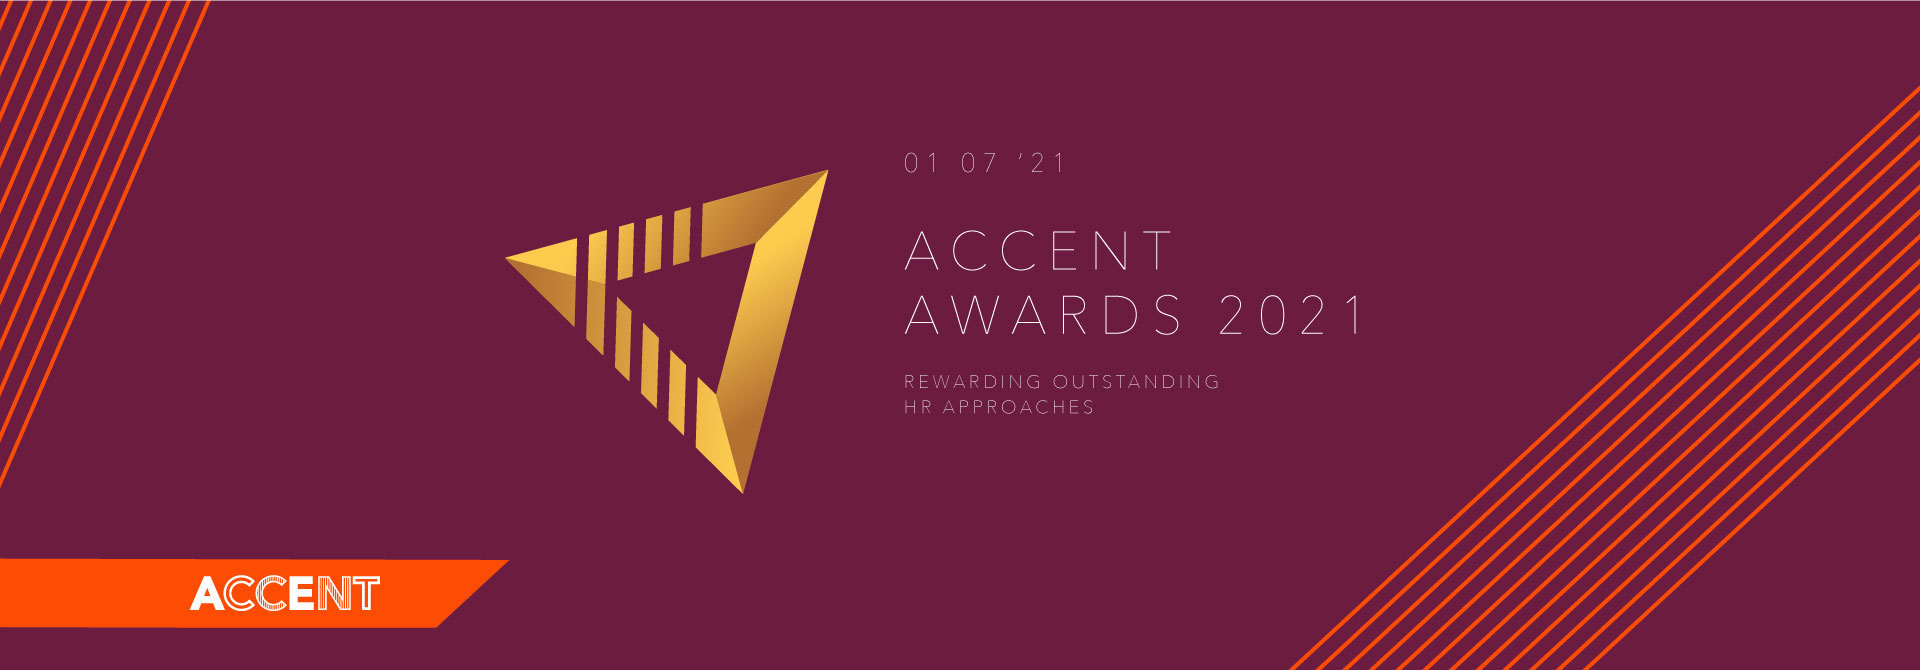 Accent Awards